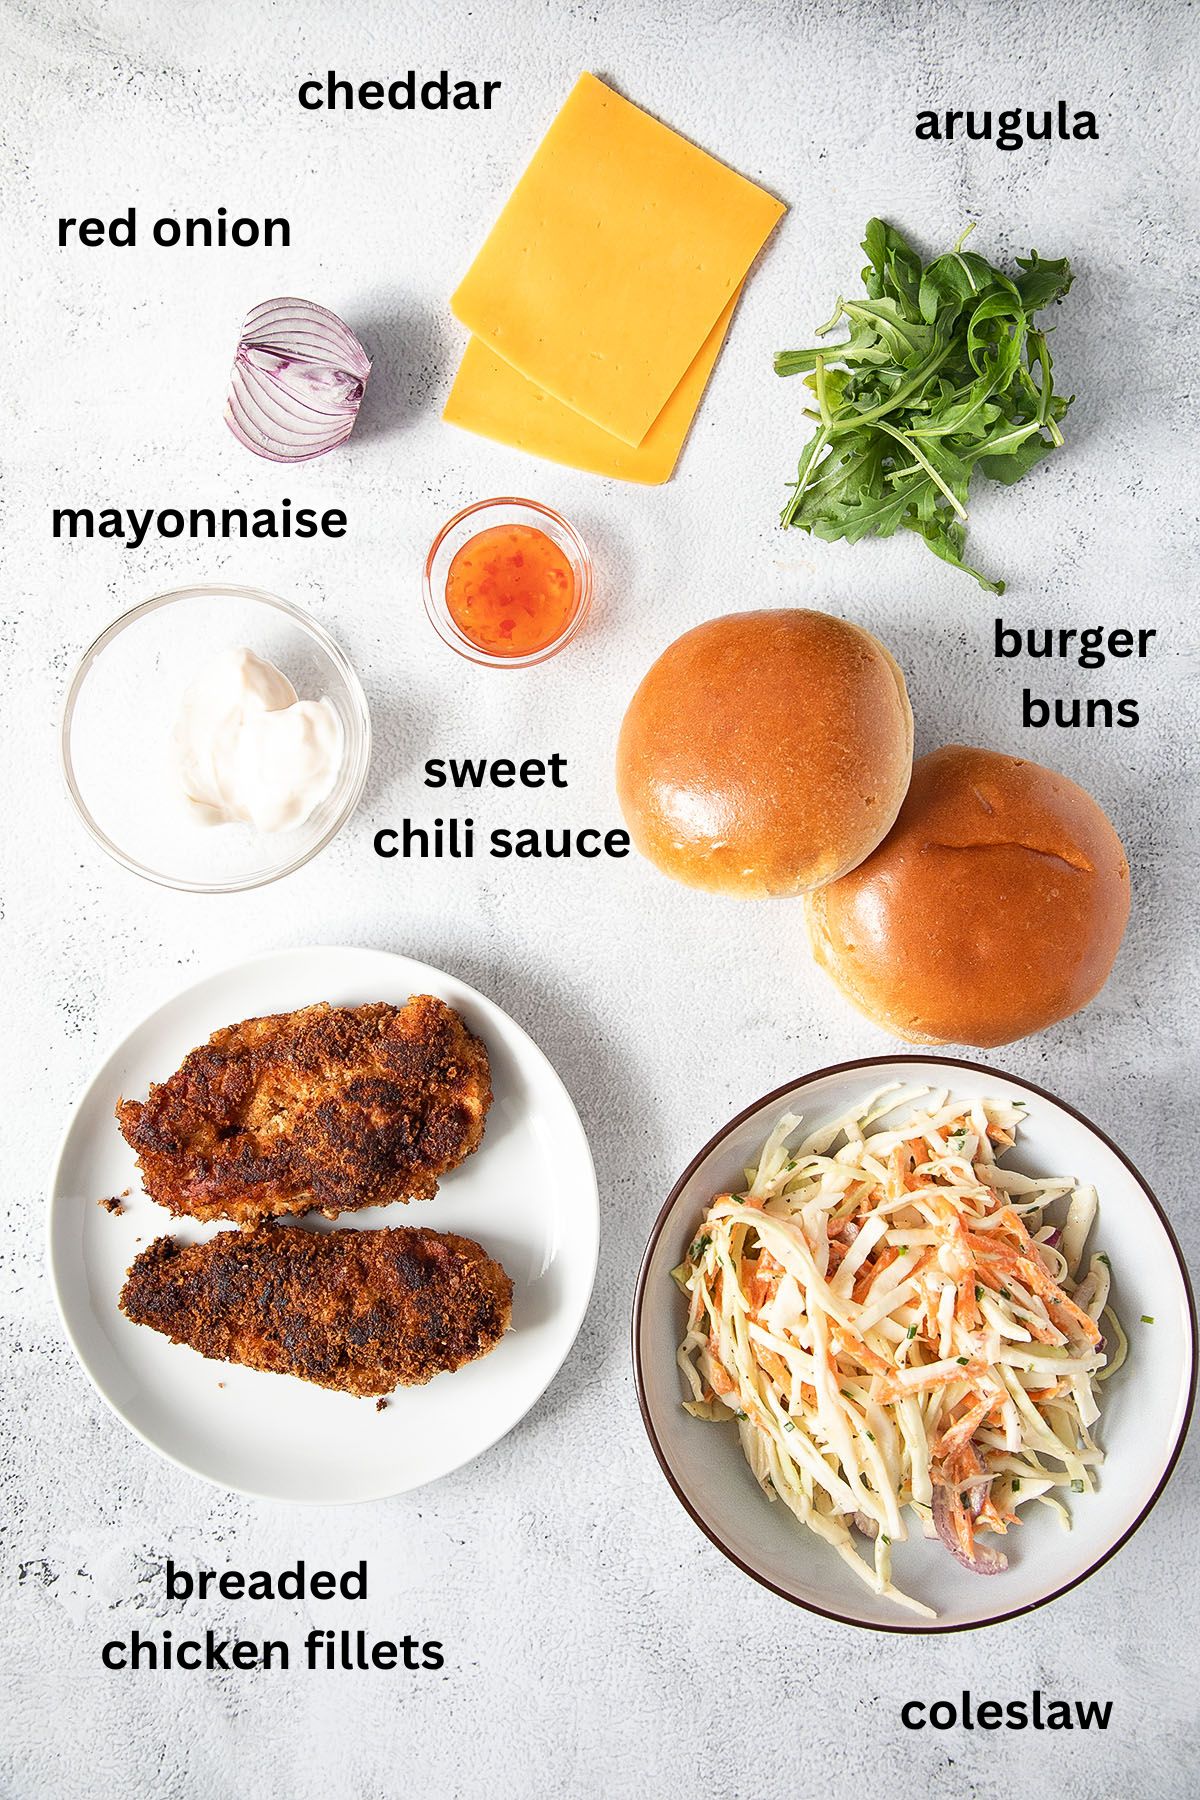 listed ingredients for making burgers with chicken fillet, cheddar and coleslaw.